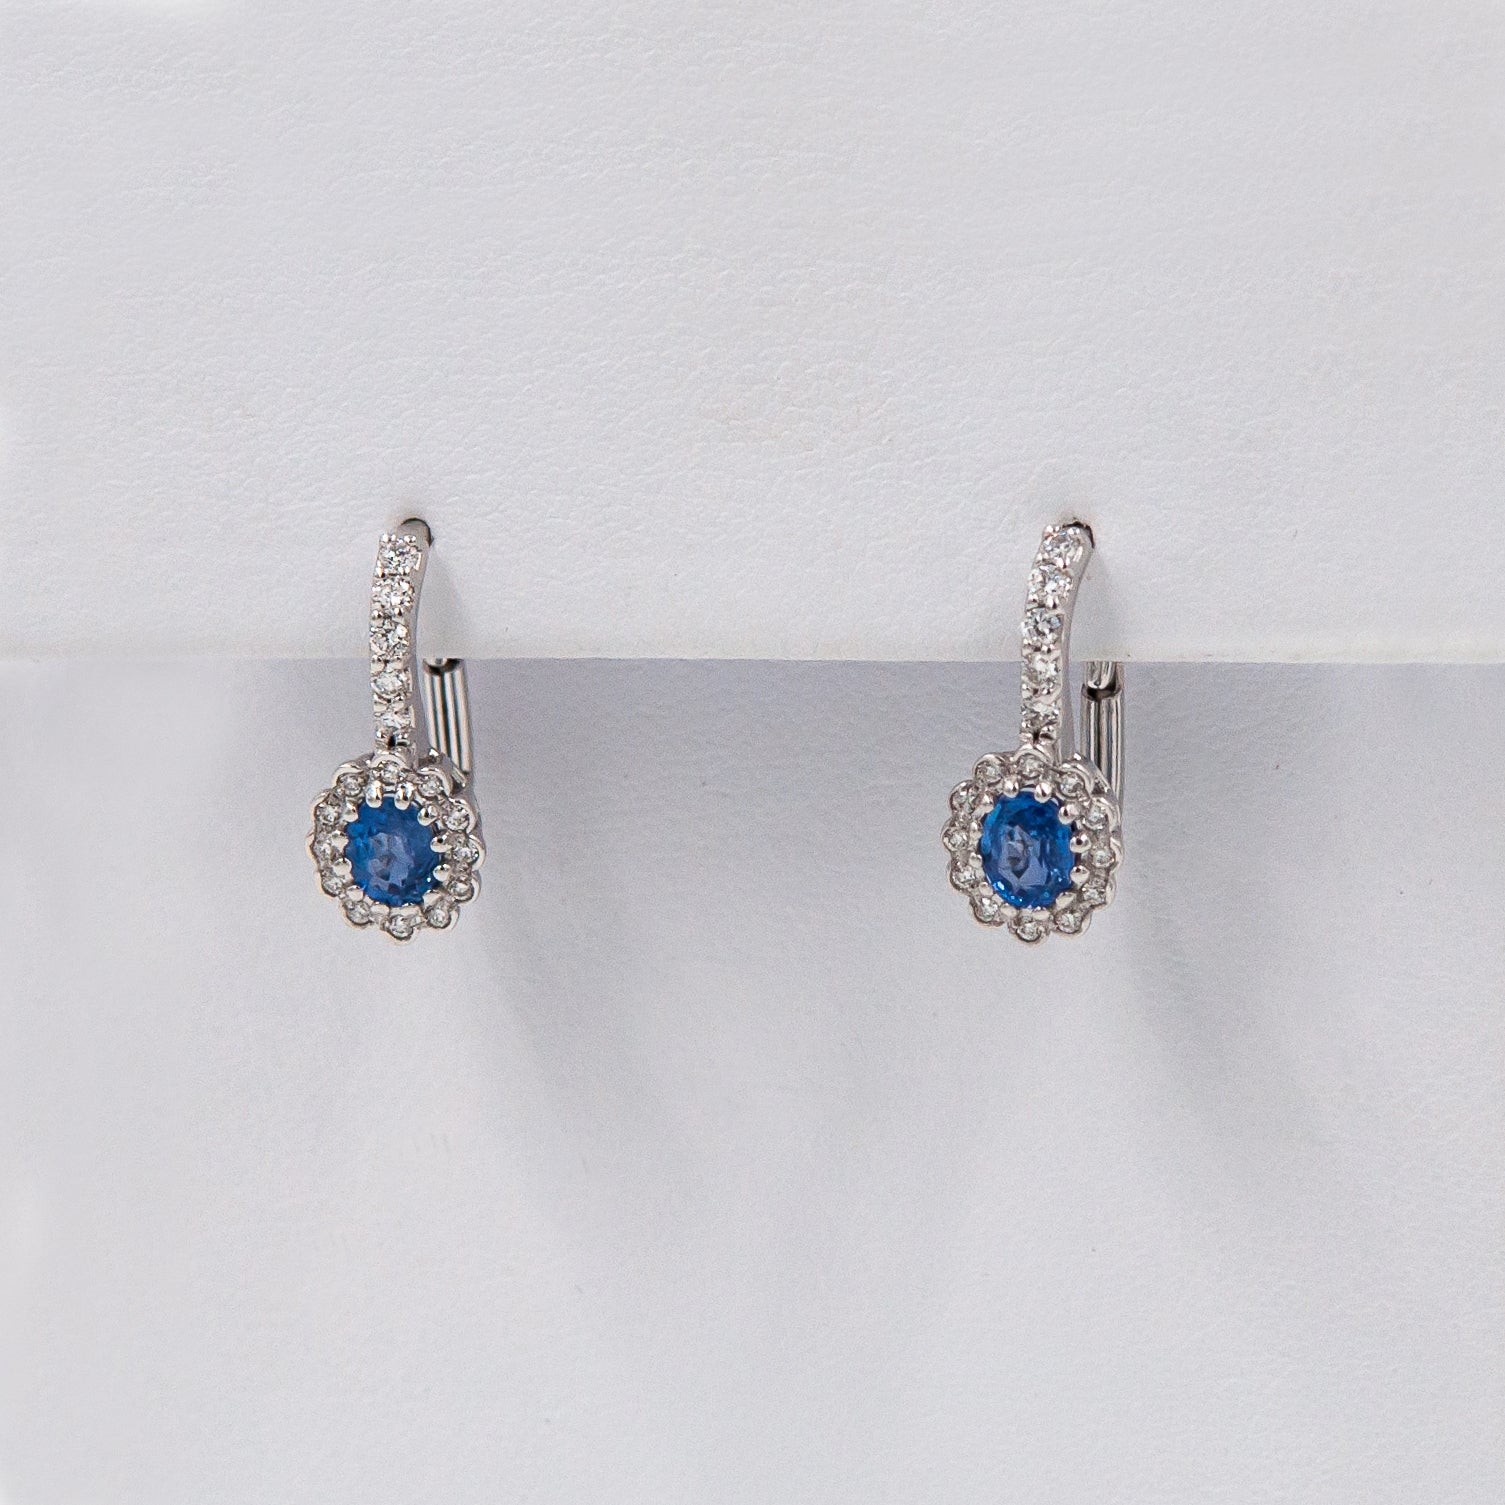 Sapphire Flowers earrings with Diamonds and Sapphires